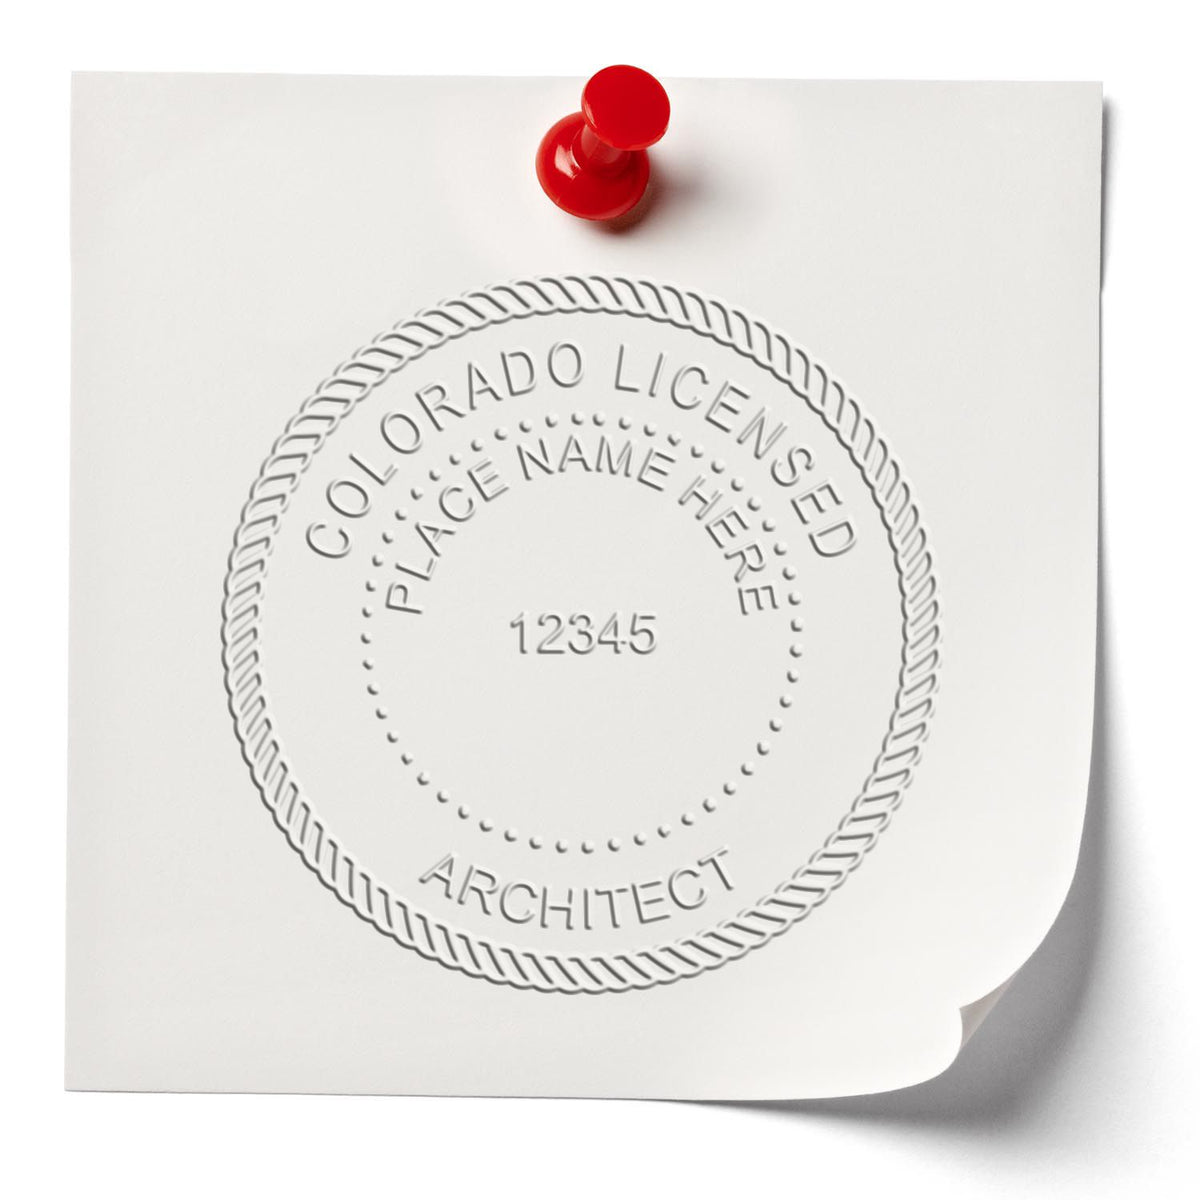 The State of Colorado Architectural Seal Embosser stamp impression comes to life with a crisp, detailed photo on paper - showcasing true professional quality.